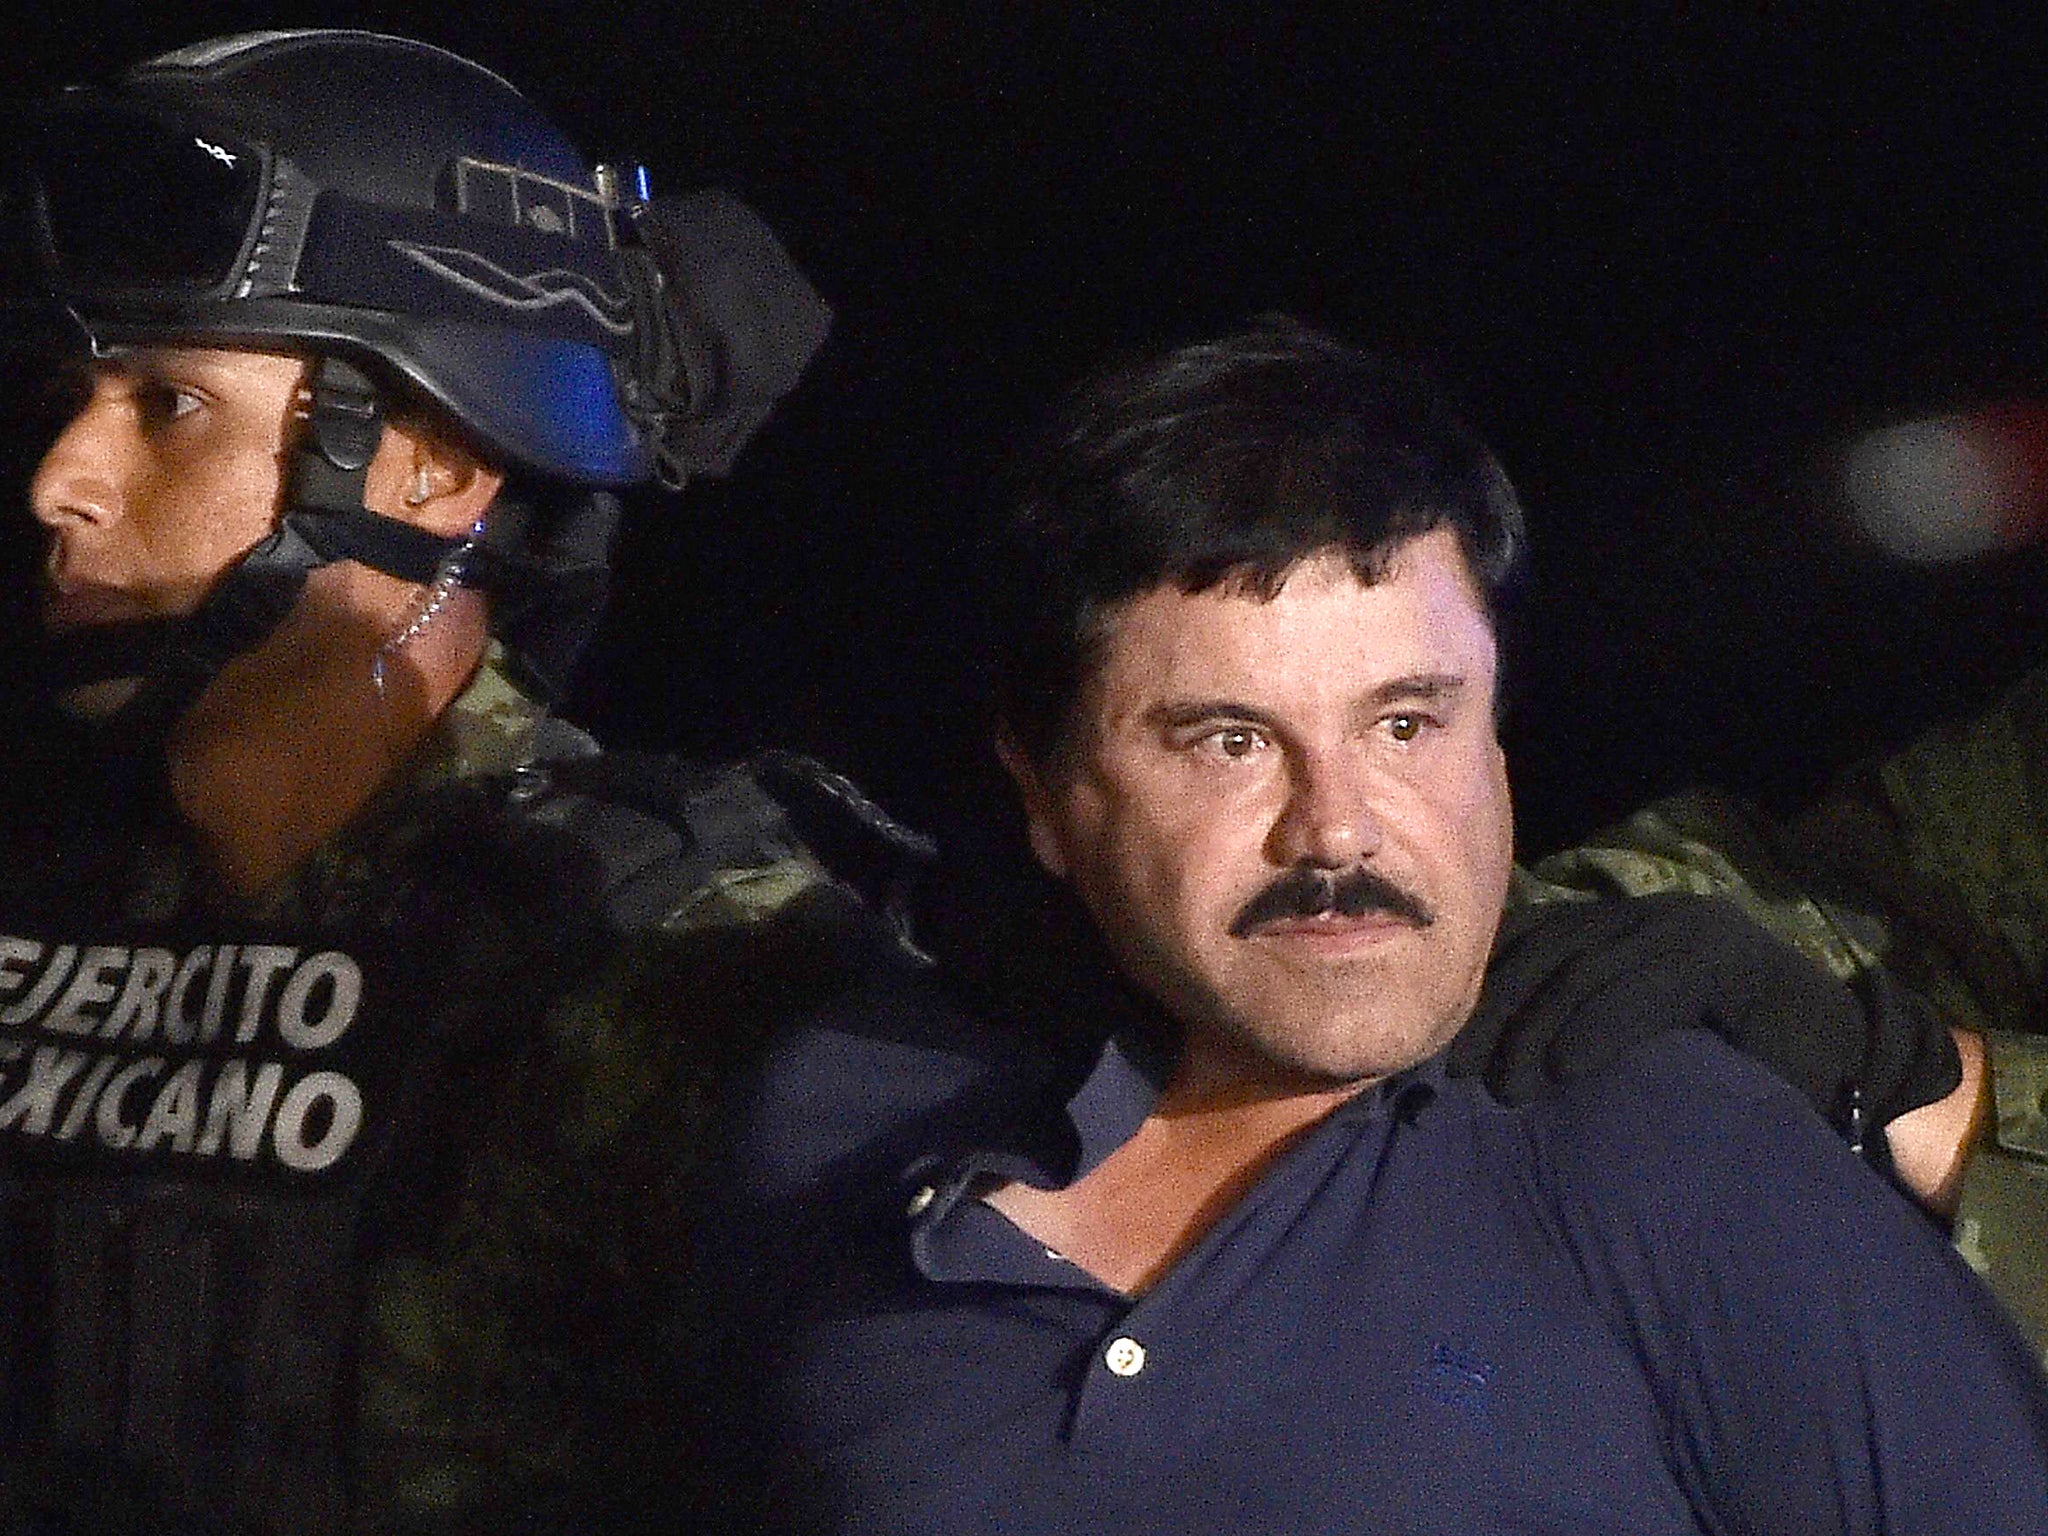 Mr Chapo was extradited to the United States last year